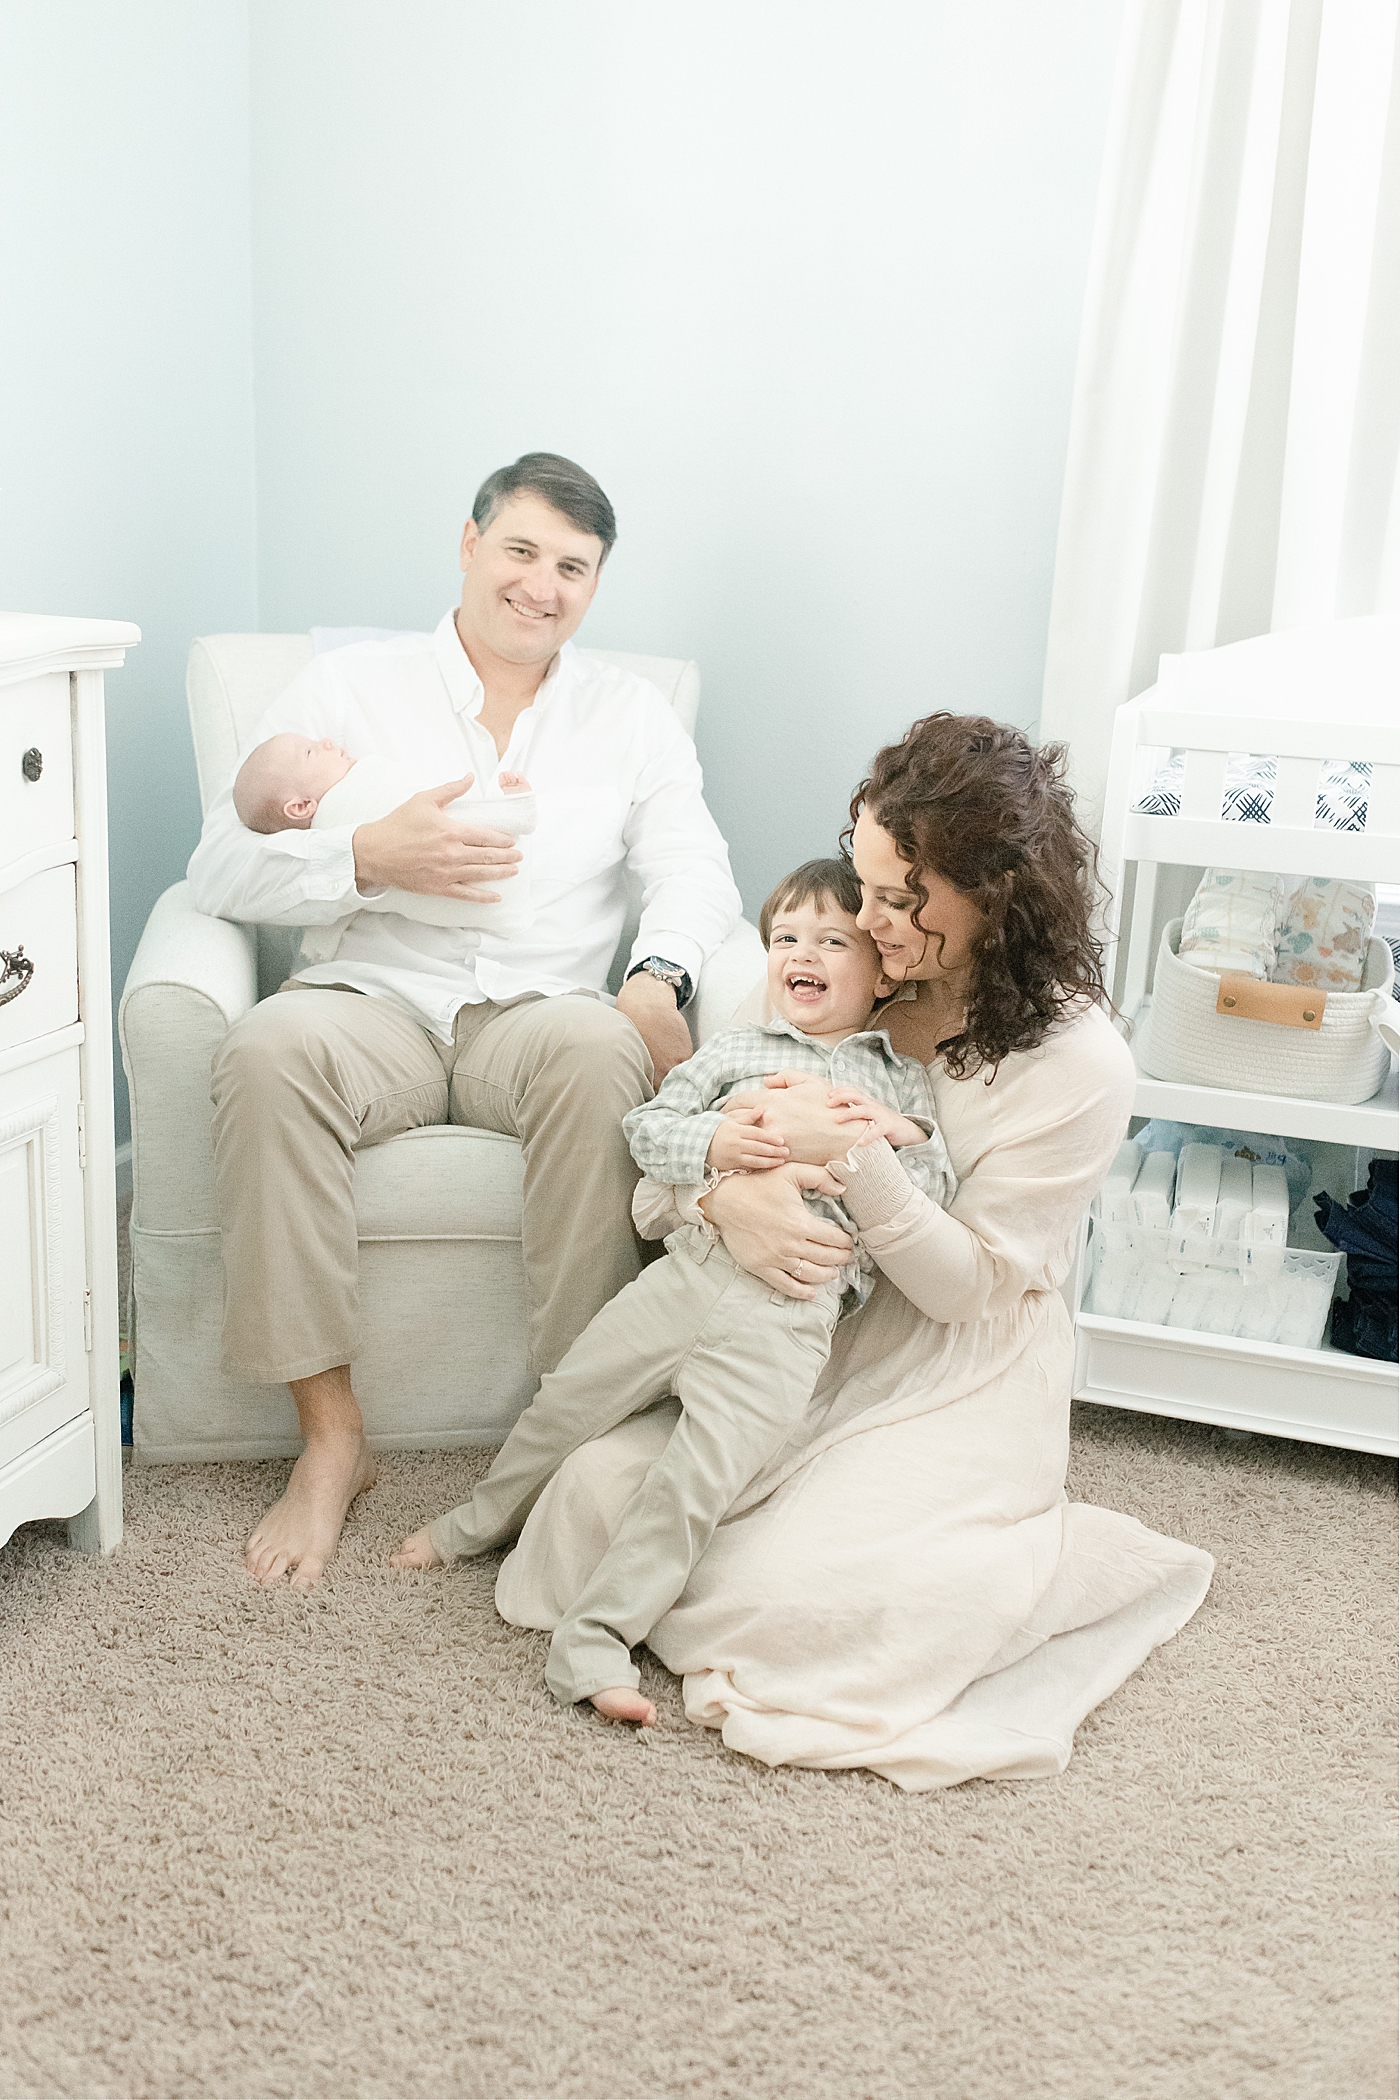 Family snuggling together in baby's nursery | Photo by Pascagoula NB photographer Little Sunshine Photography